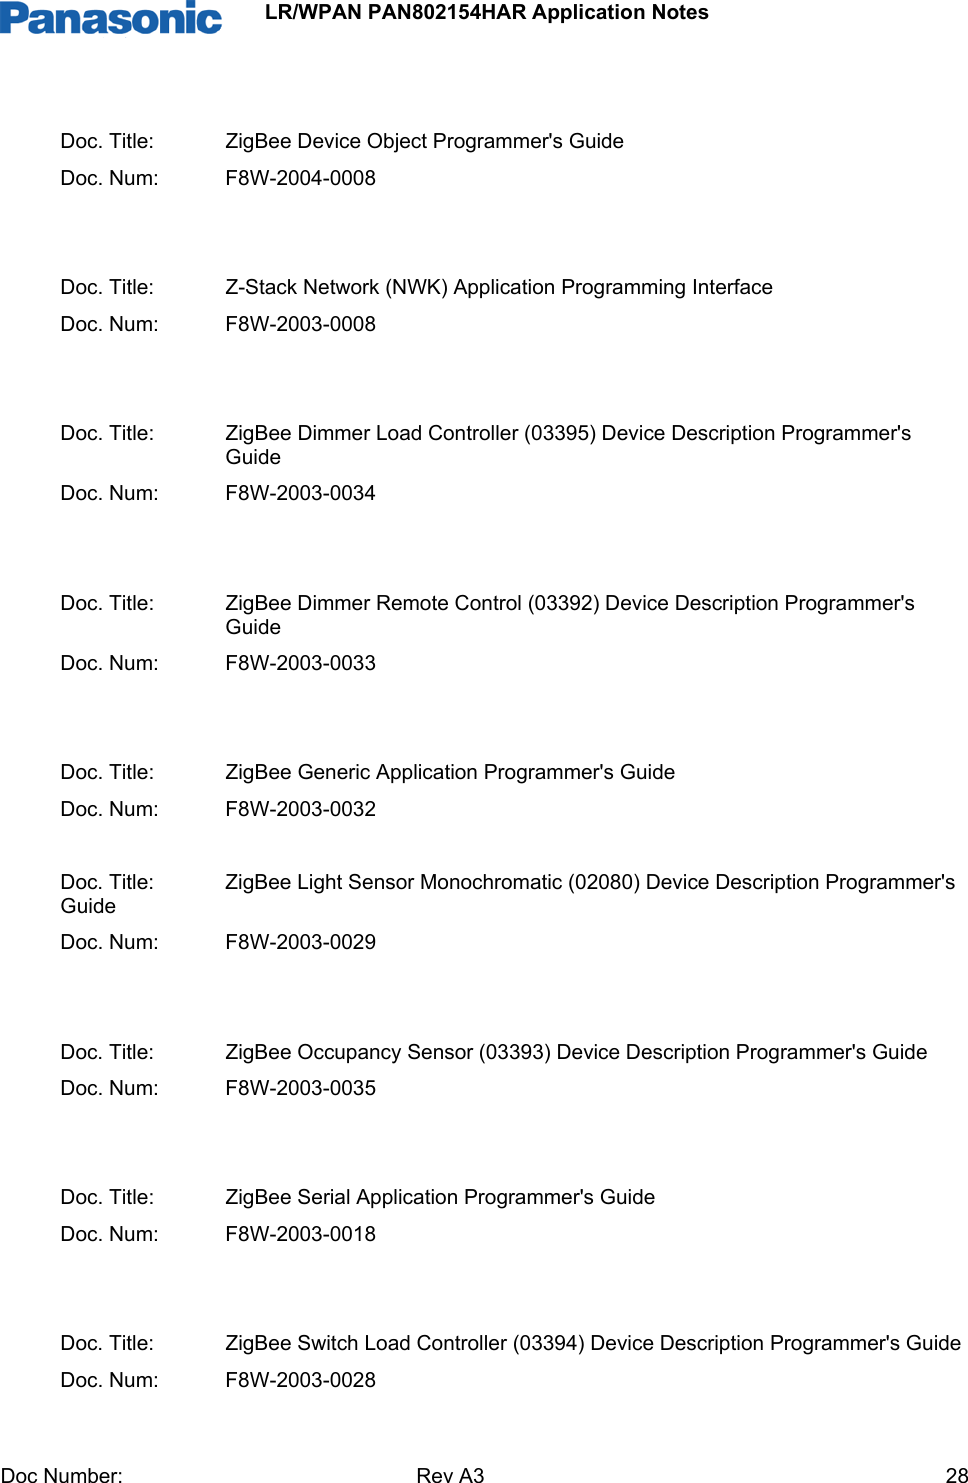                 LR/WPAN PAN802154HAR Application Notes Doc Number:   Rev A3    28 Doc. Title:   ZigBee Device Object Programmer&apos;s Guide Doc. Num:   F8W-2004-0008   Doc. Title:   Z-Stack Network (NWK) Application Programming Interface Doc. Num:   F8W-2003-0008   Doc. Title:   ZigBee Dimmer Load Controller (03395) Device Description Programmer&apos;s Guide Doc. Num:   F8W-2003-0034   Doc. Title:   ZigBee Dimmer Remote Control (03392) Device Description Programmer&apos;s Guide Doc. Num:   F8W-2003-0033   Doc. Title:   ZigBee Generic Application Programmer&apos;s Guide Doc. Num:   F8W-2003-0032  Doc. Title:   ZigBee Light Sensor Monochromatic (02080) Device Description Programmer&apos;s Guide Doc. Num:   F8W-2003-0029   Doc. Title:   ZigBee Occupancy Sensor (03393) Device Description Programmer&apos;s Guide Doc. Num:   F8W-2003-0035   Doc. Title:   ZigBee Serial Application Programmer&apos;s Guide Doc. Num:   F8W-2003-0018   Doc. Title:   ZigBee Switch Load Controller (03394) Device Description Programmer&apos;s Guide Doc. Num:   F8W-2003-0028 